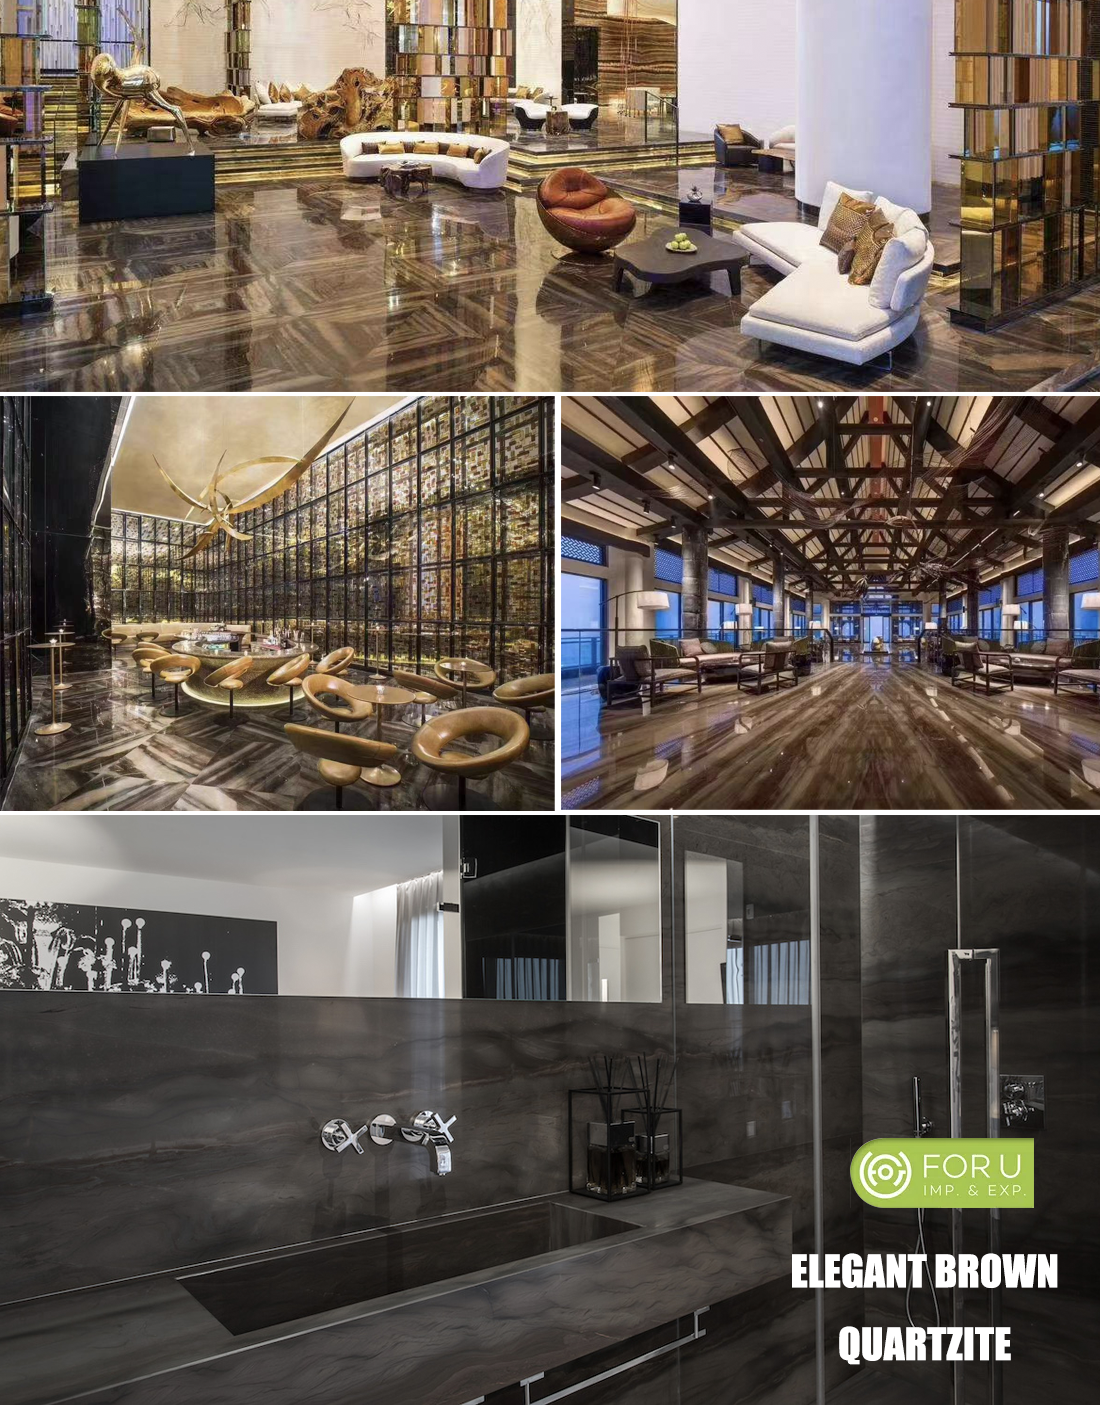 Elegant Brown Quartzite Countertops and Flooring Tiles of W Hotel Projects